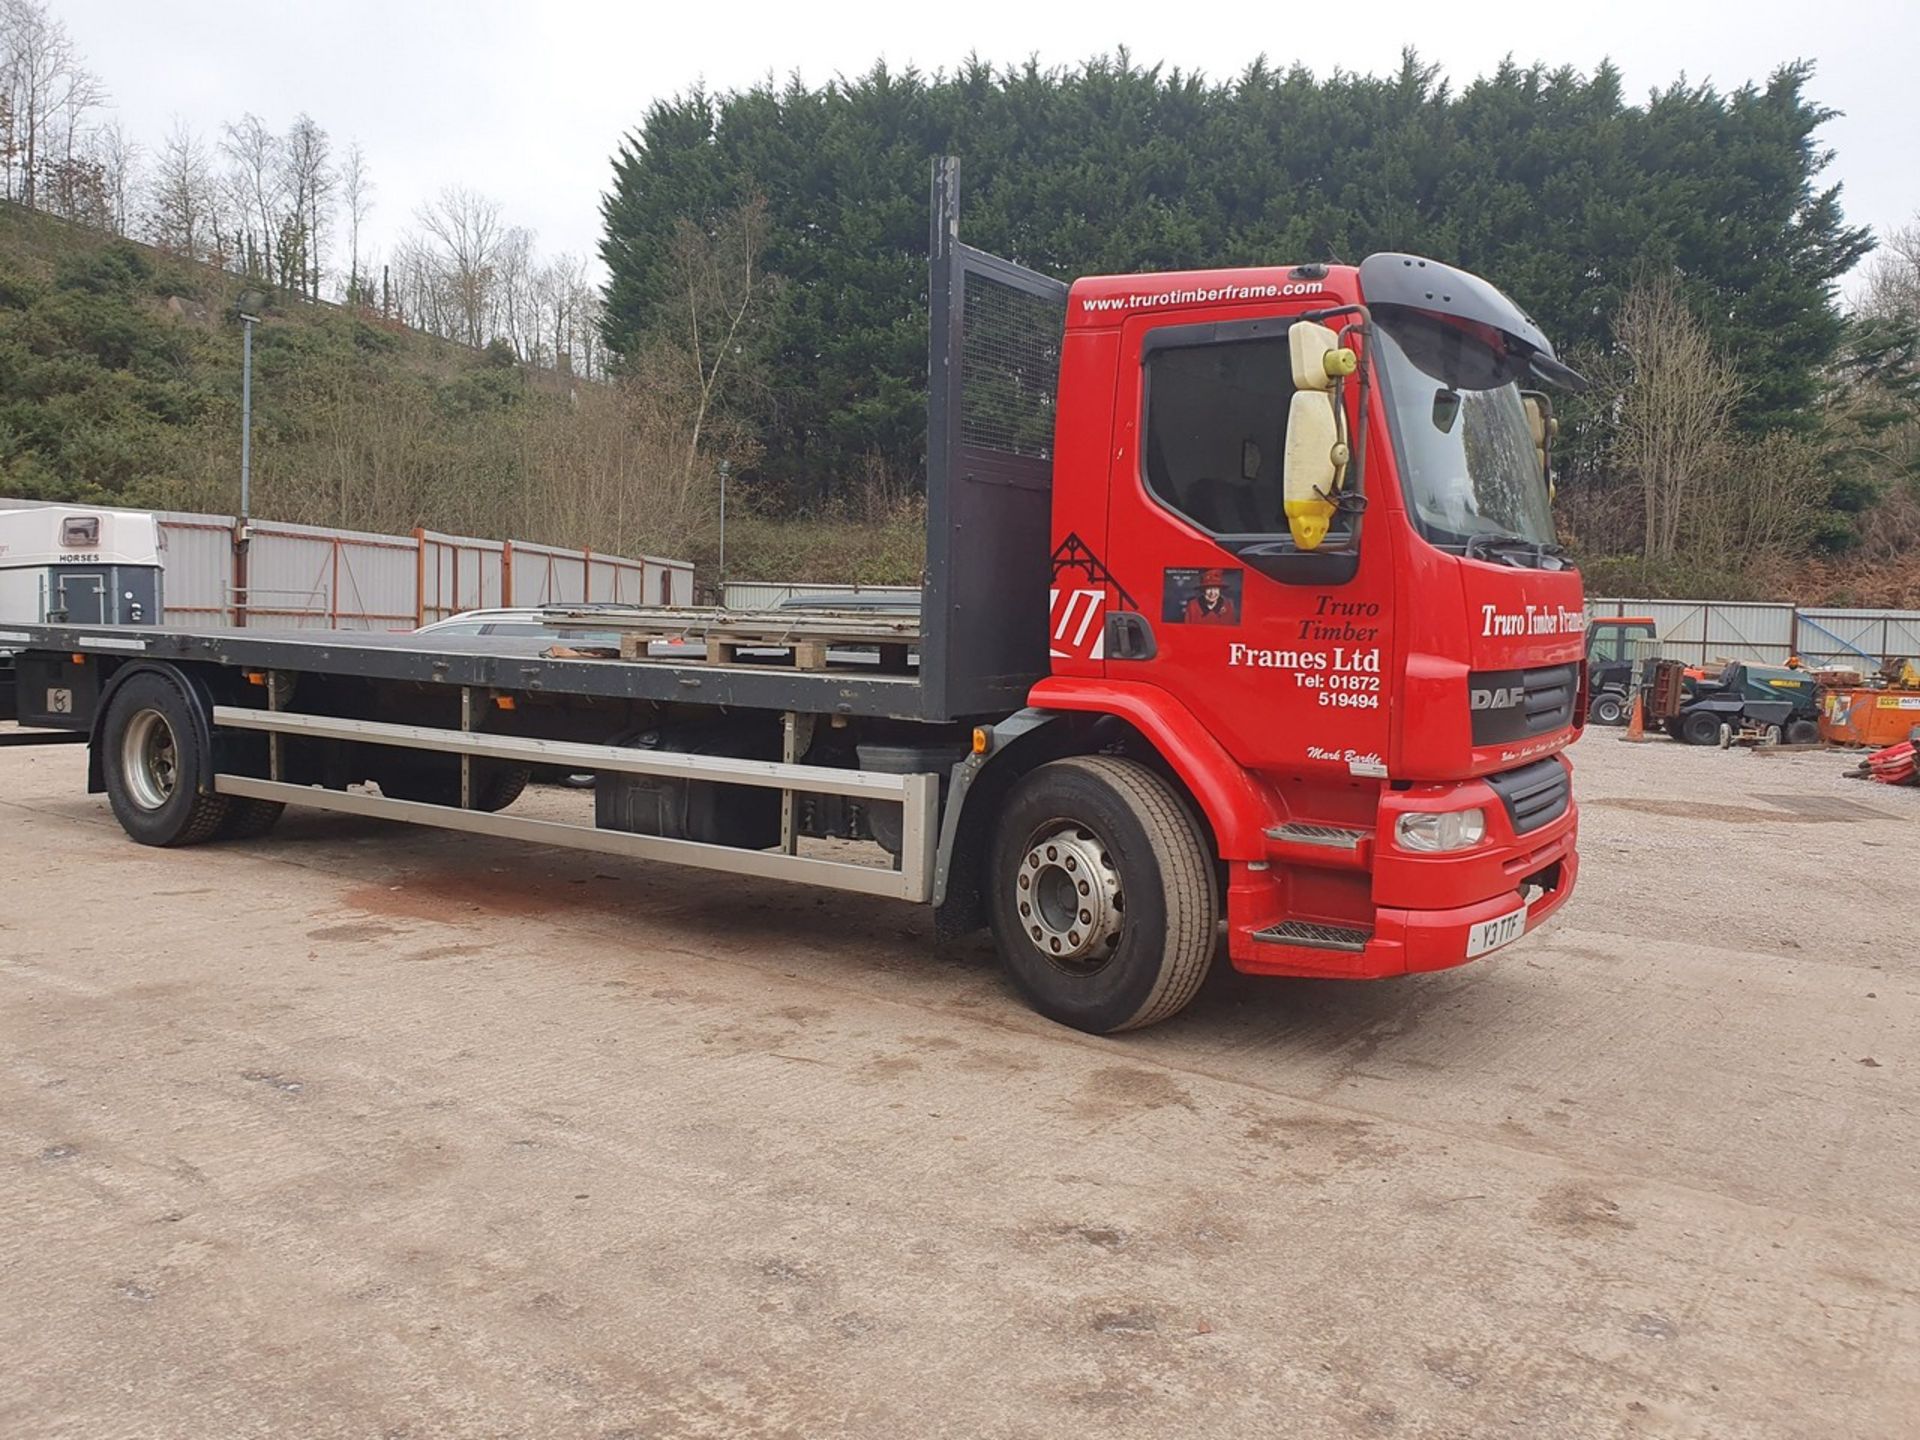 13/13 DAF TRUCKS FLAT BED - 6693cc 2dr (Red) - Image 2 of 23